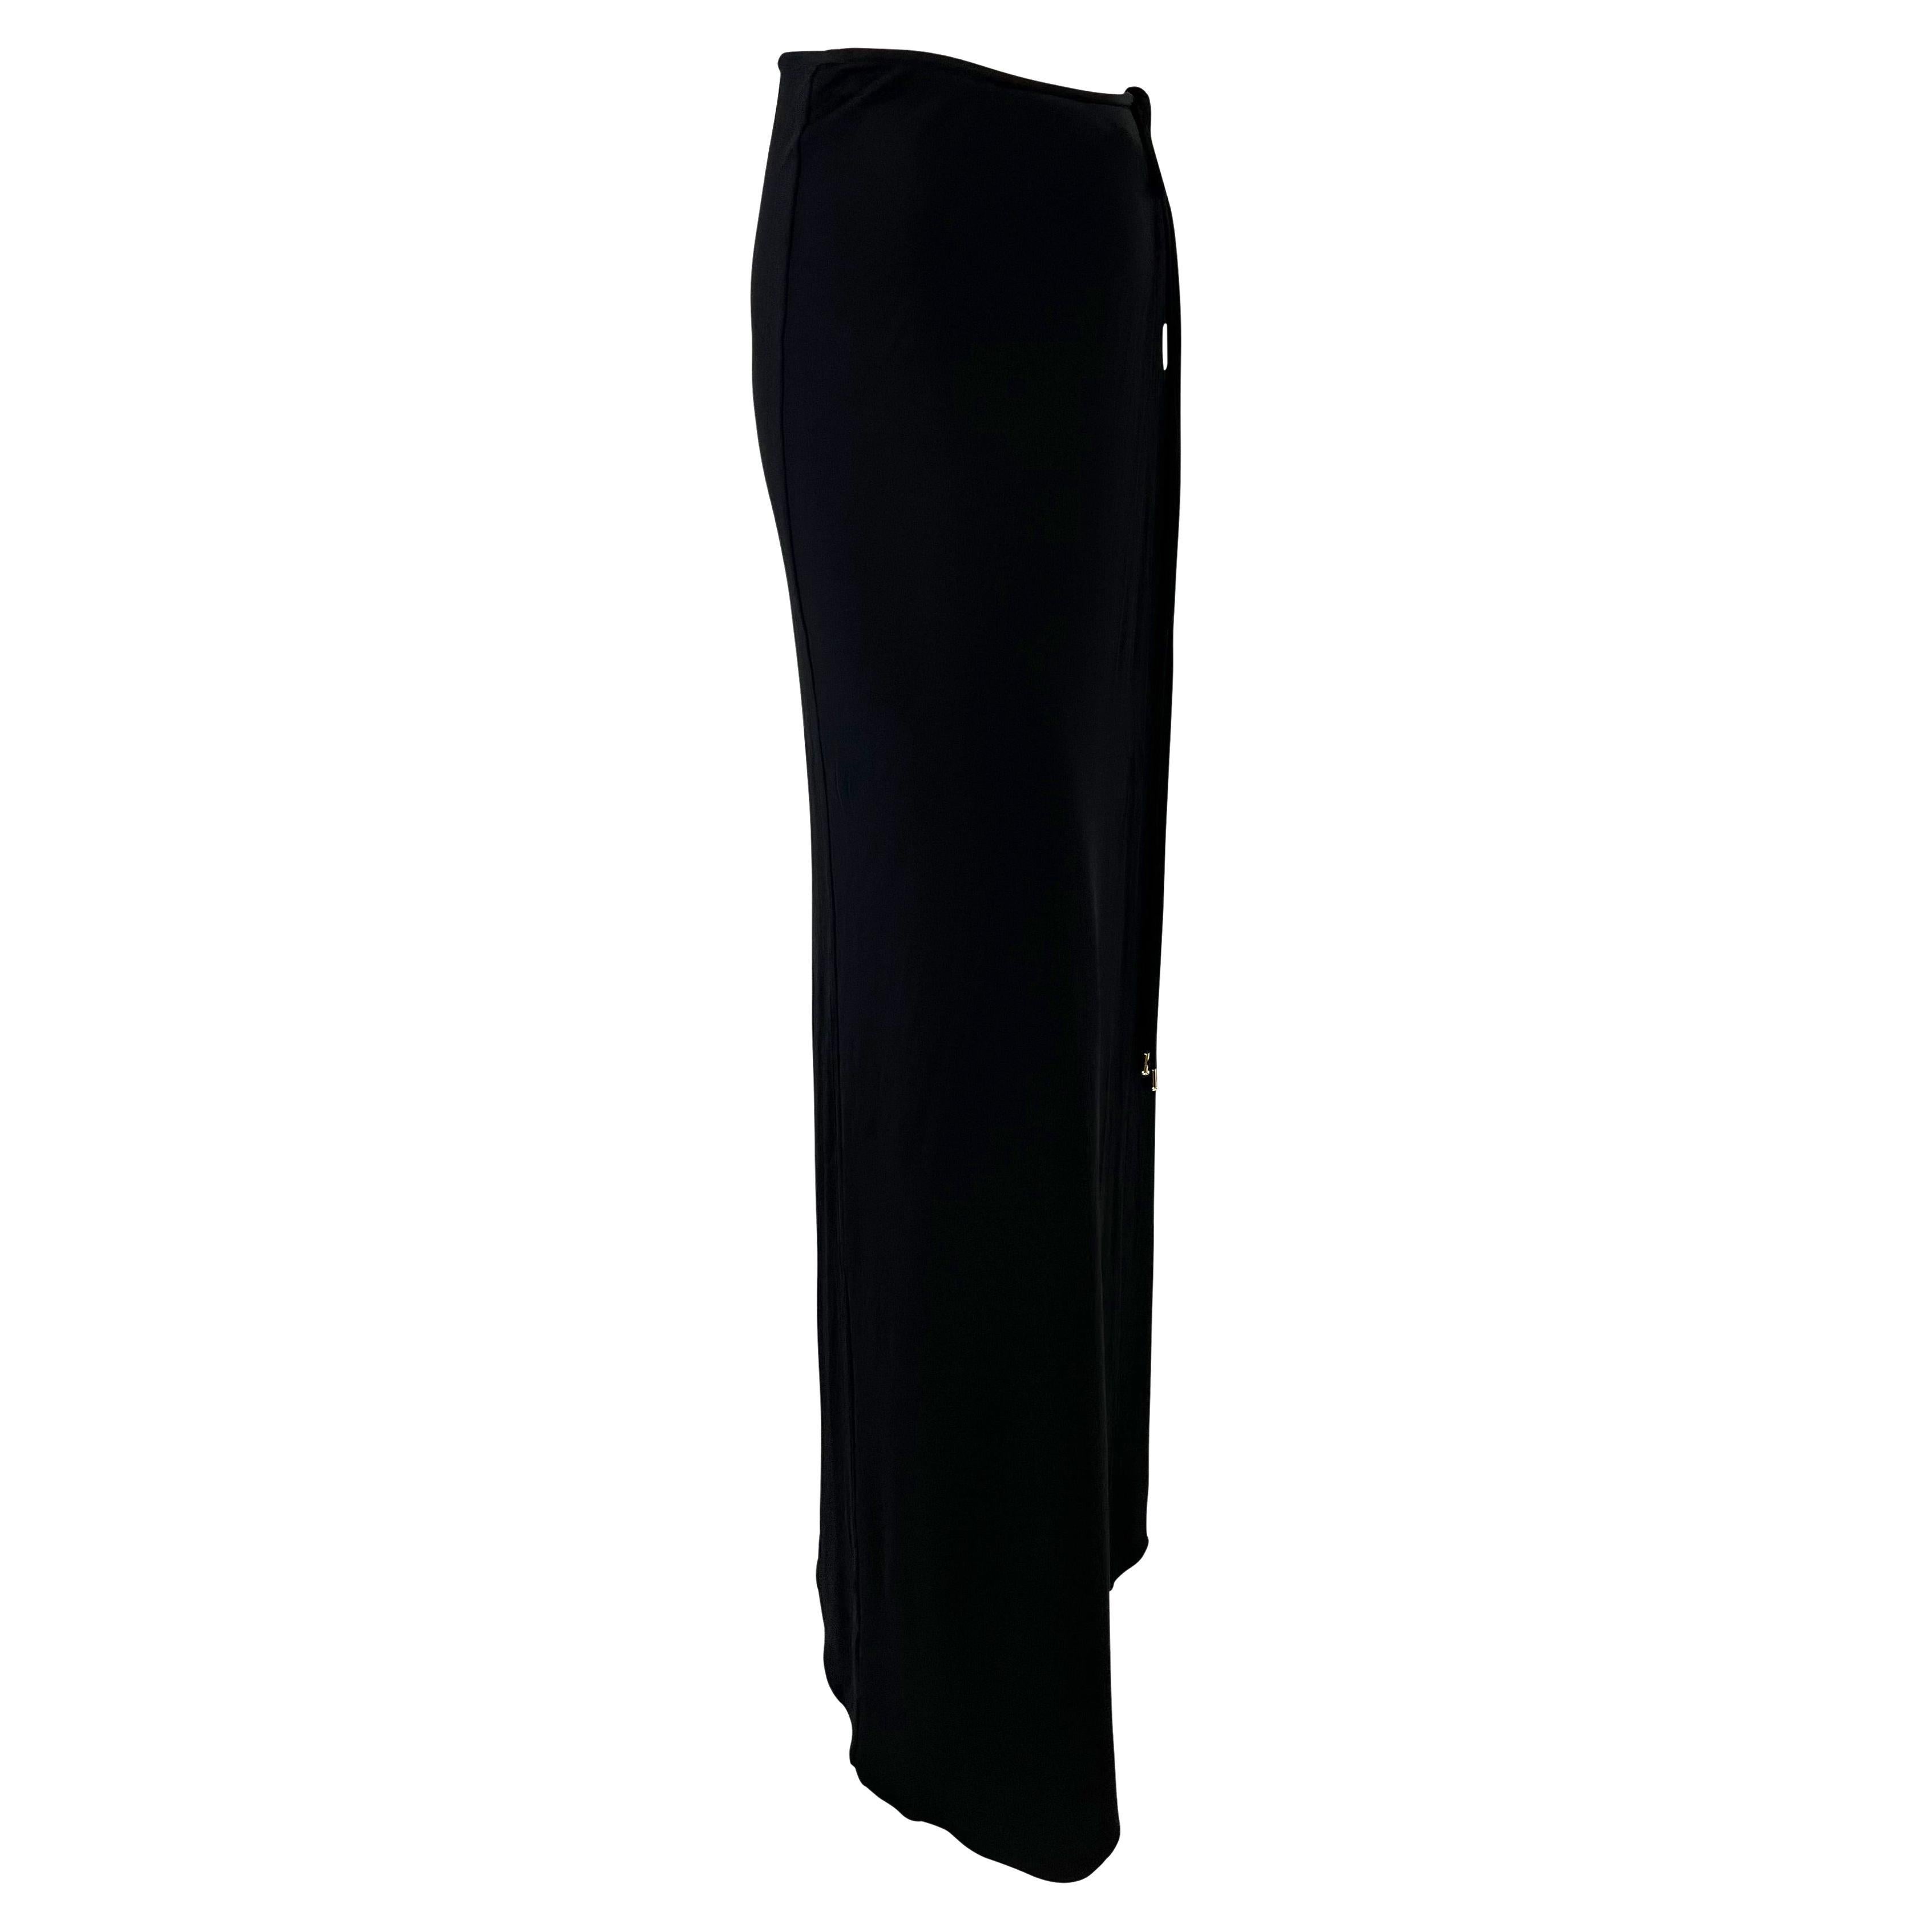 S/S 1997 Gucci by Tom Ford Black Wrap Maxi G Logo Stretch Viscose Skirt In Good Condition For Sale In West Hollywood, CA